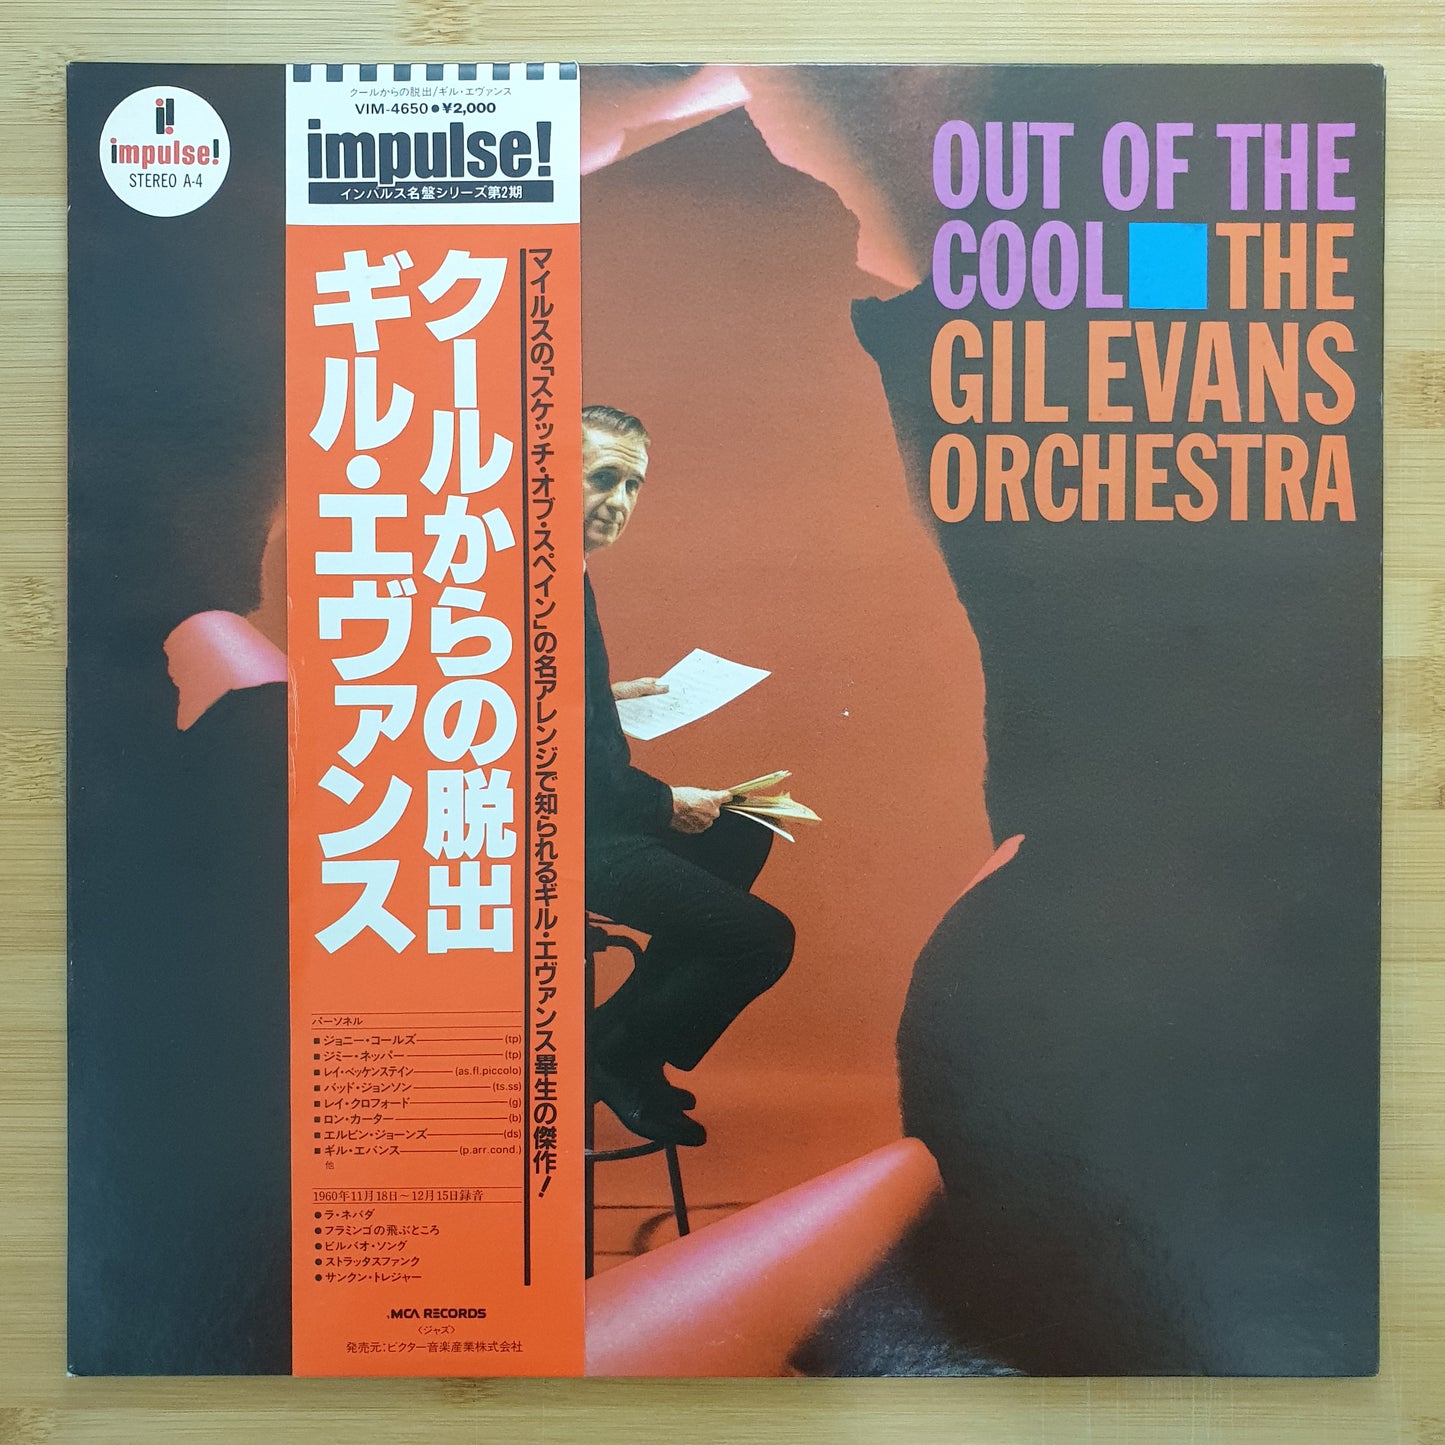 The Gil Evans Orchestra - Out Of The Cool